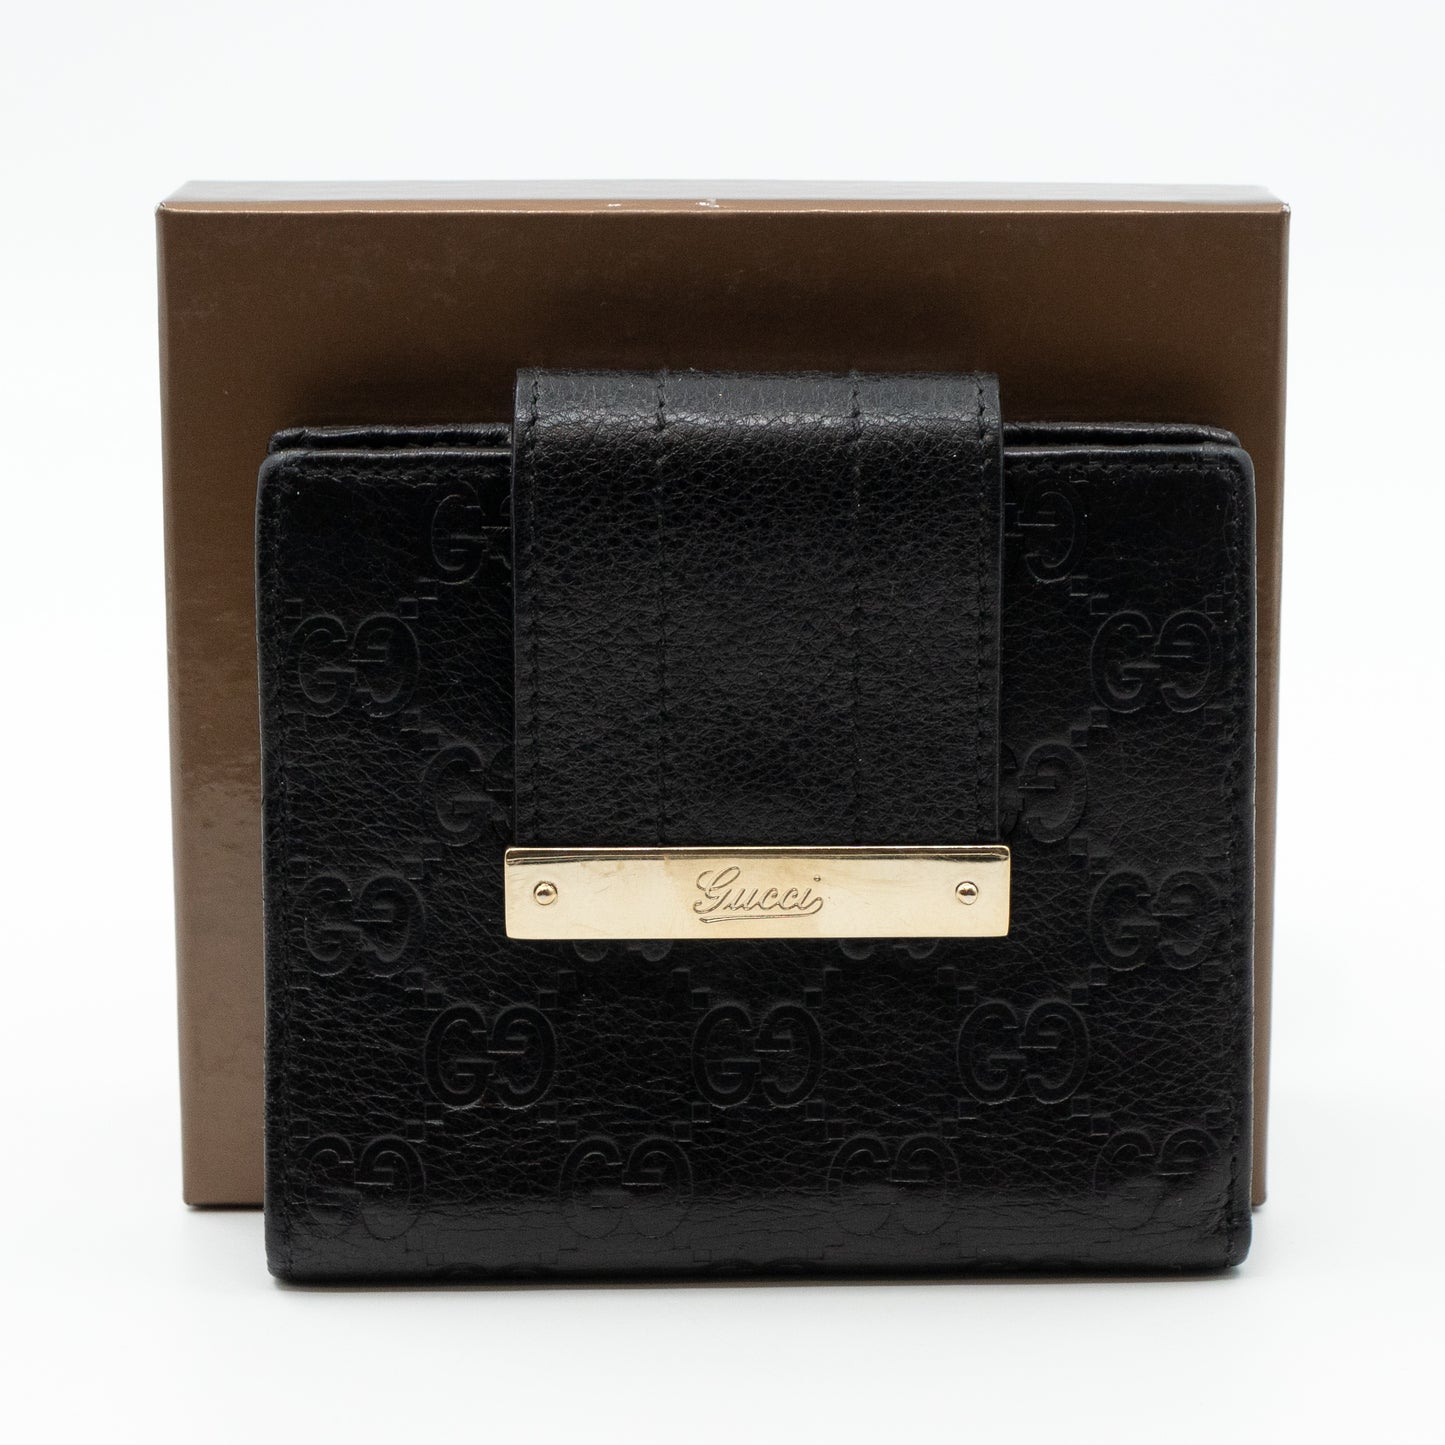 Compact Flap Wallet Black Leather